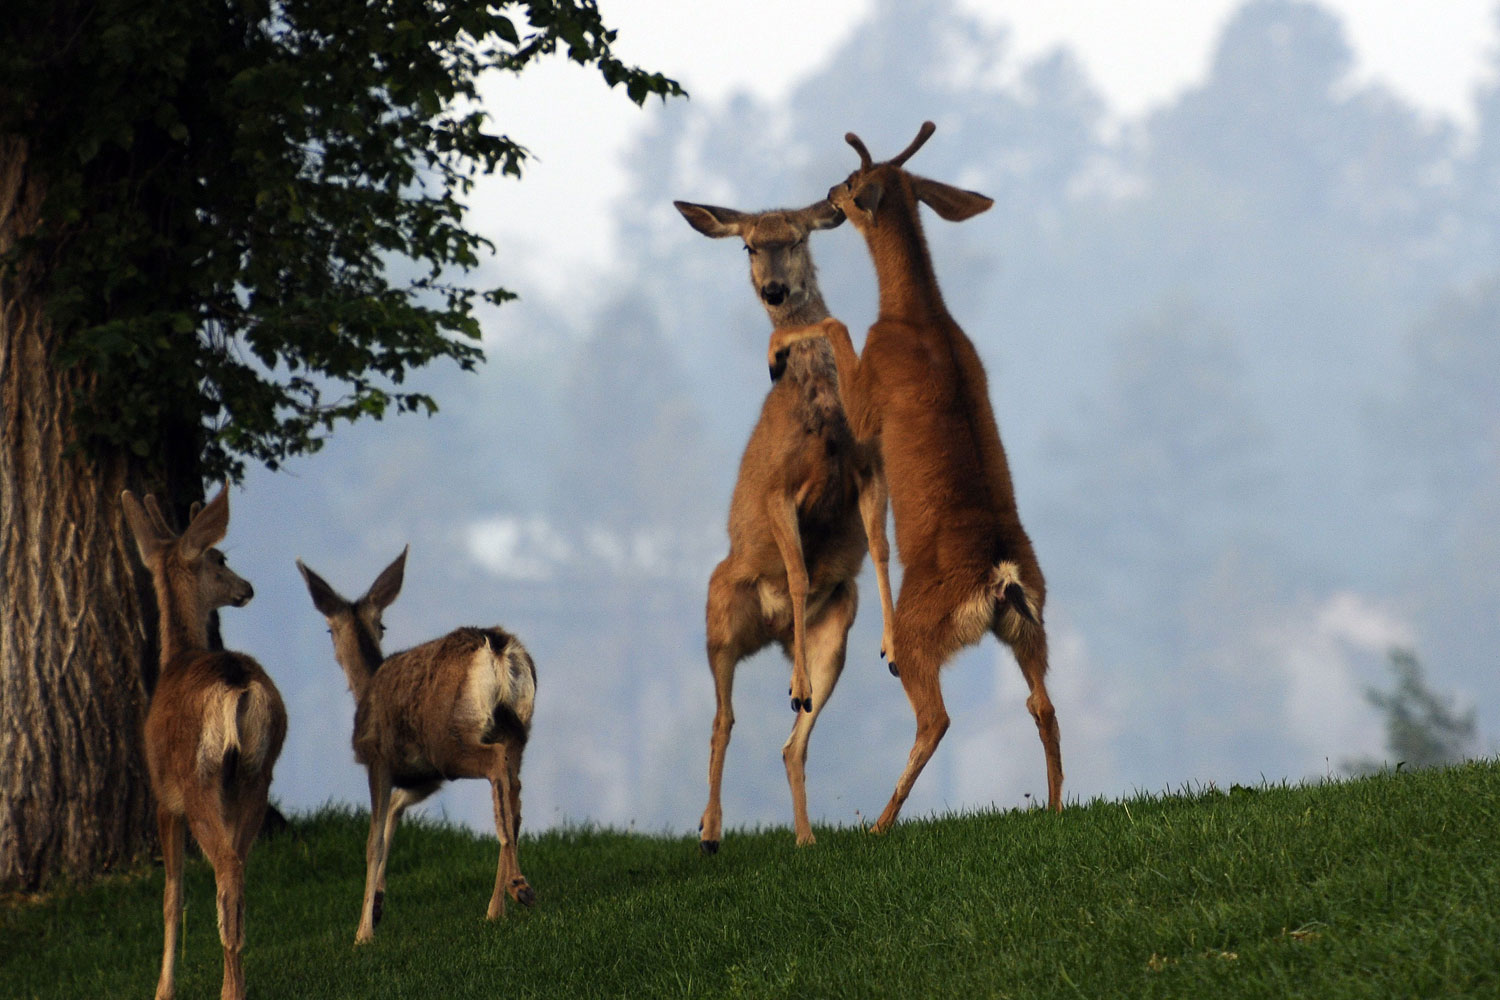 Deer interact with each other while smoke covers the town of Los Alamos from the Las Conchas fires near Los Alamos, New Mexico. The fires torched torched 60,000 acres, or about 93 square miles, in less than two days.